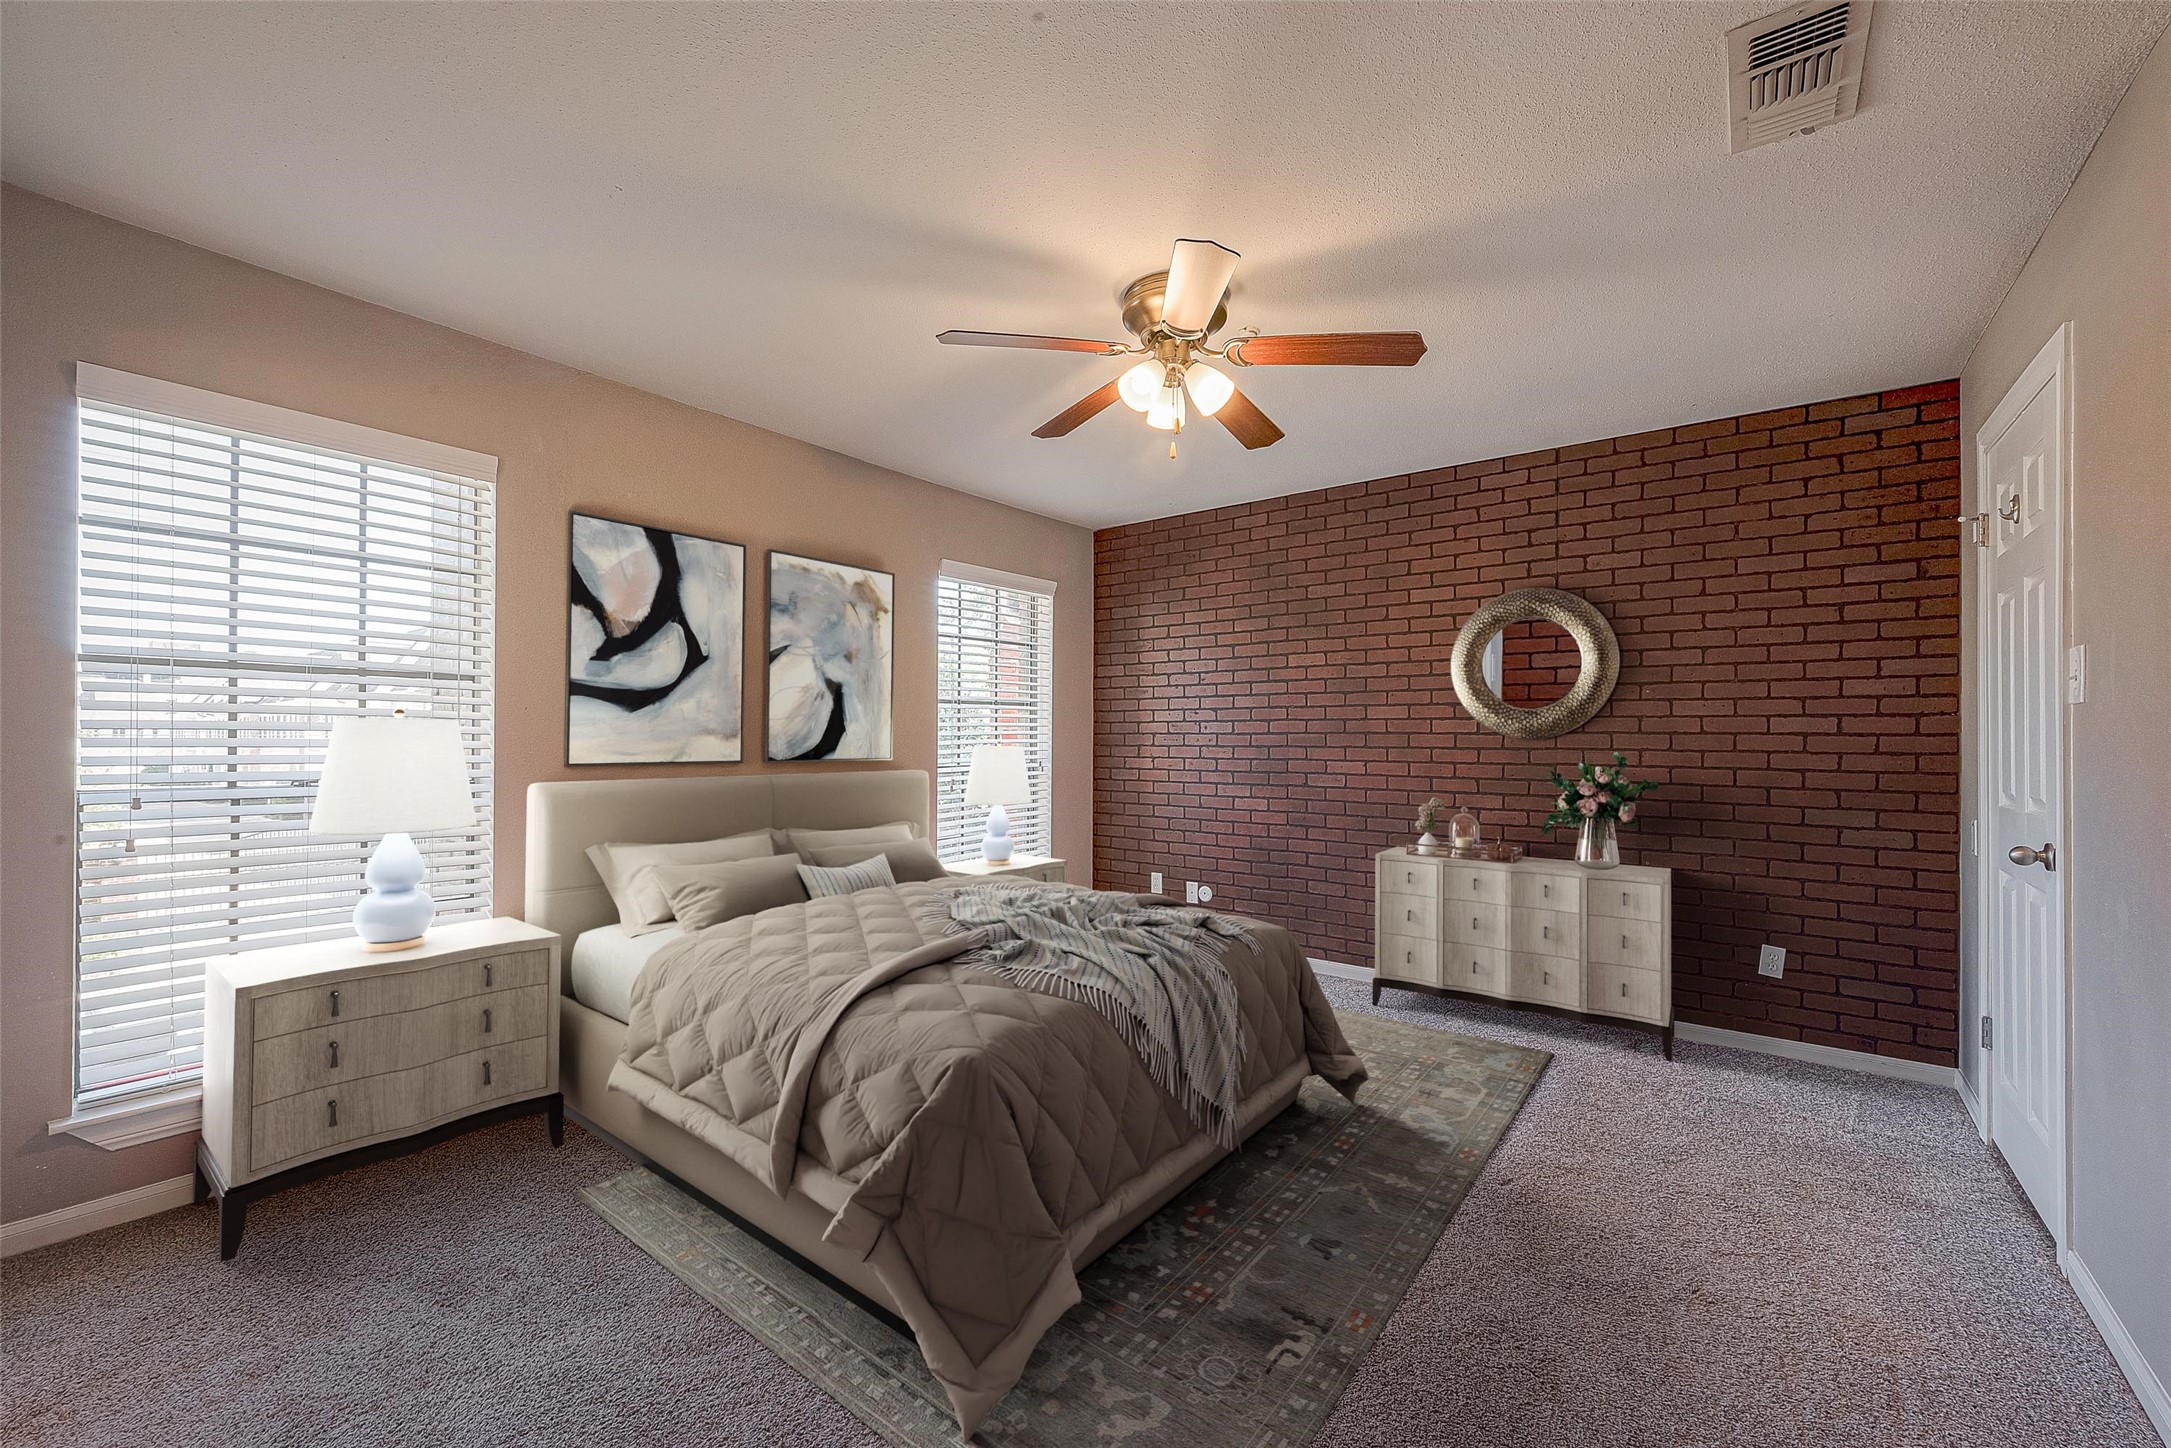 Primary bedroom with views onto Augusta. Virtually staged. Faux brick panel on wall.